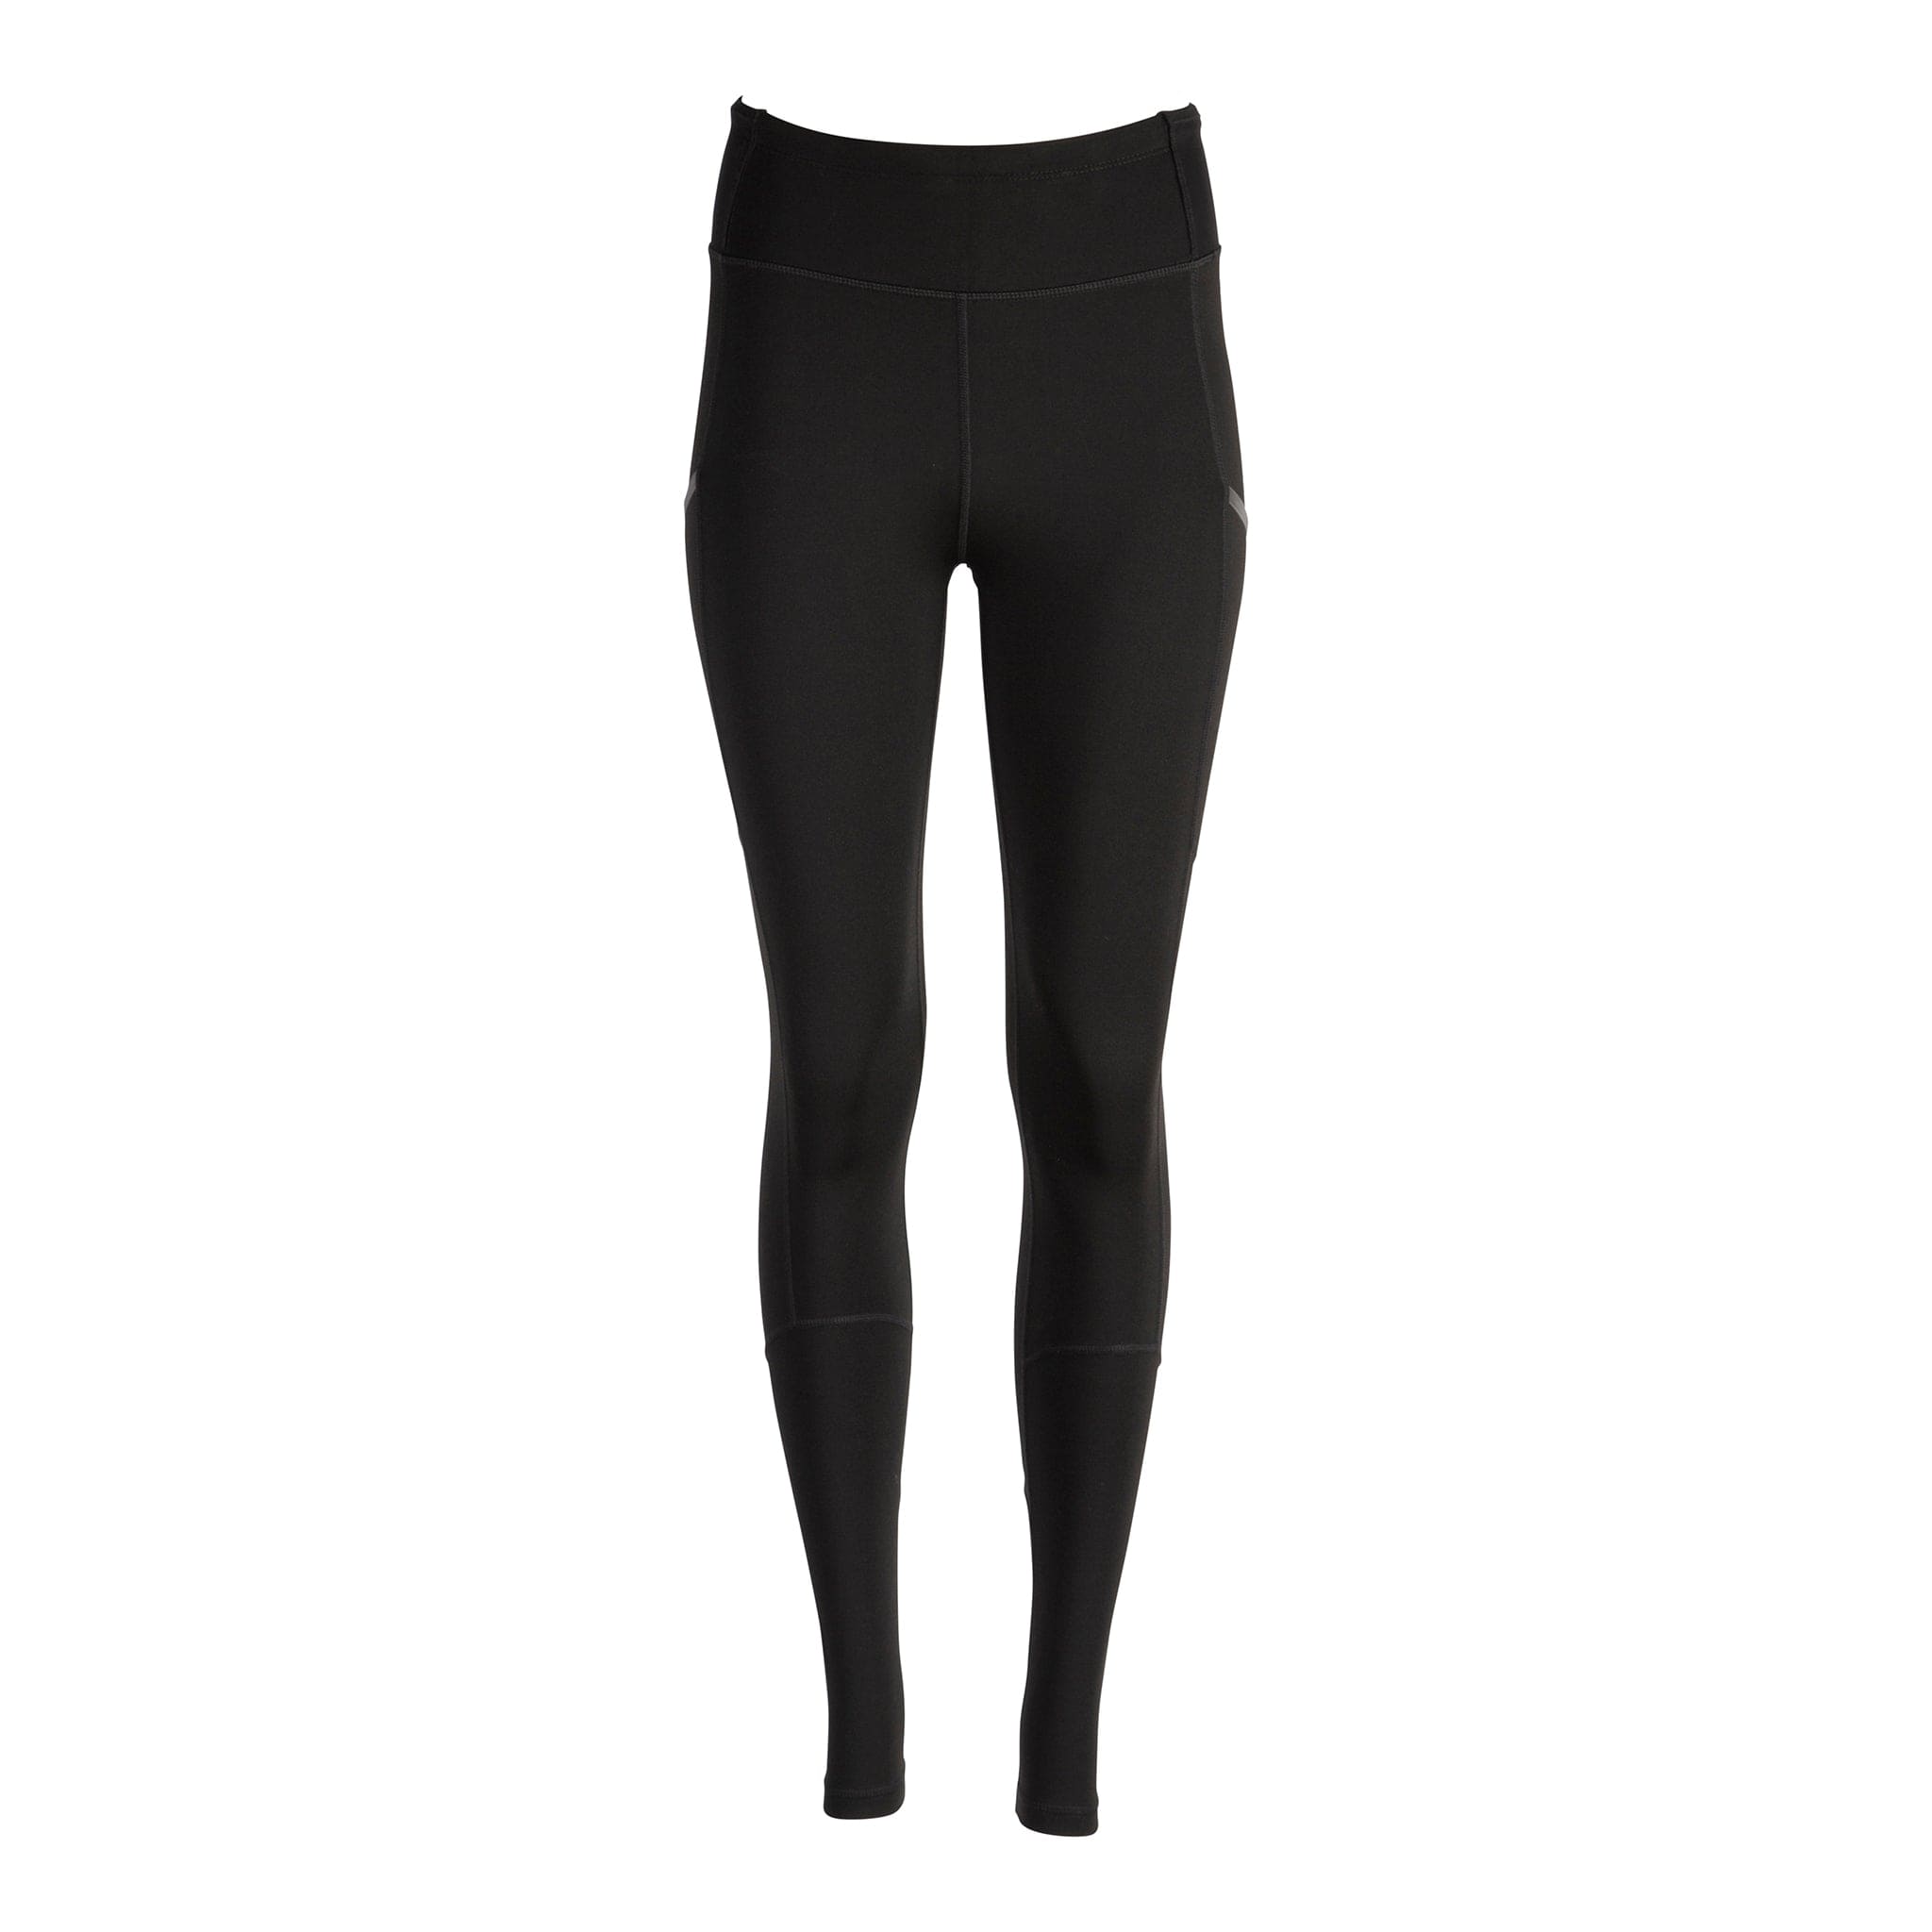 Compression Leggings for Women: Tights & Pants